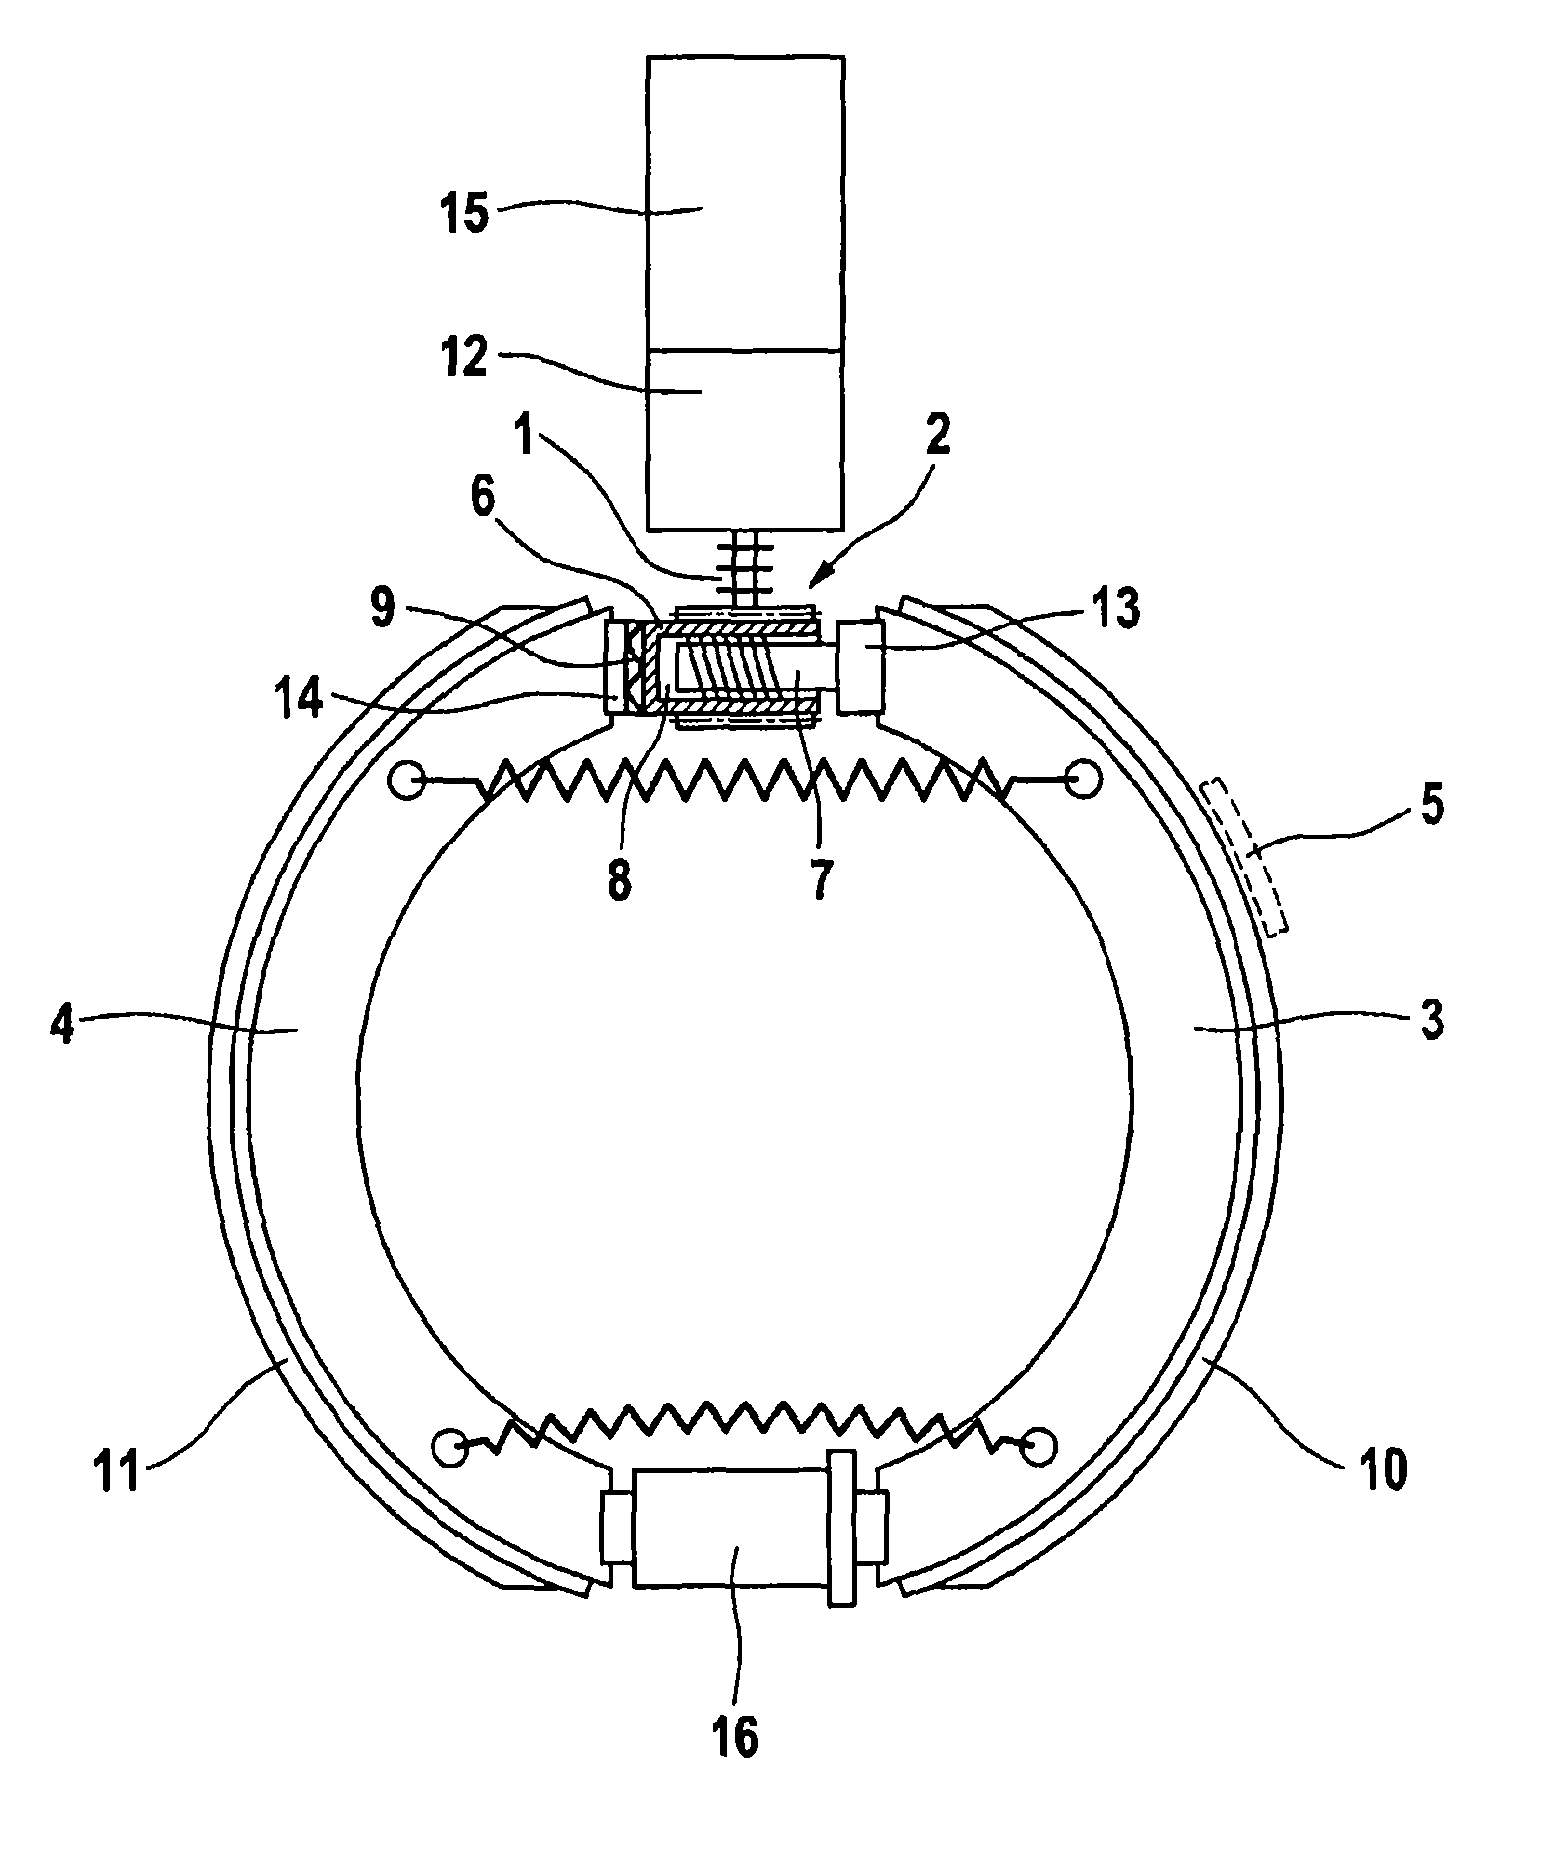 Method for the operation of an electromechanically operable parking brake